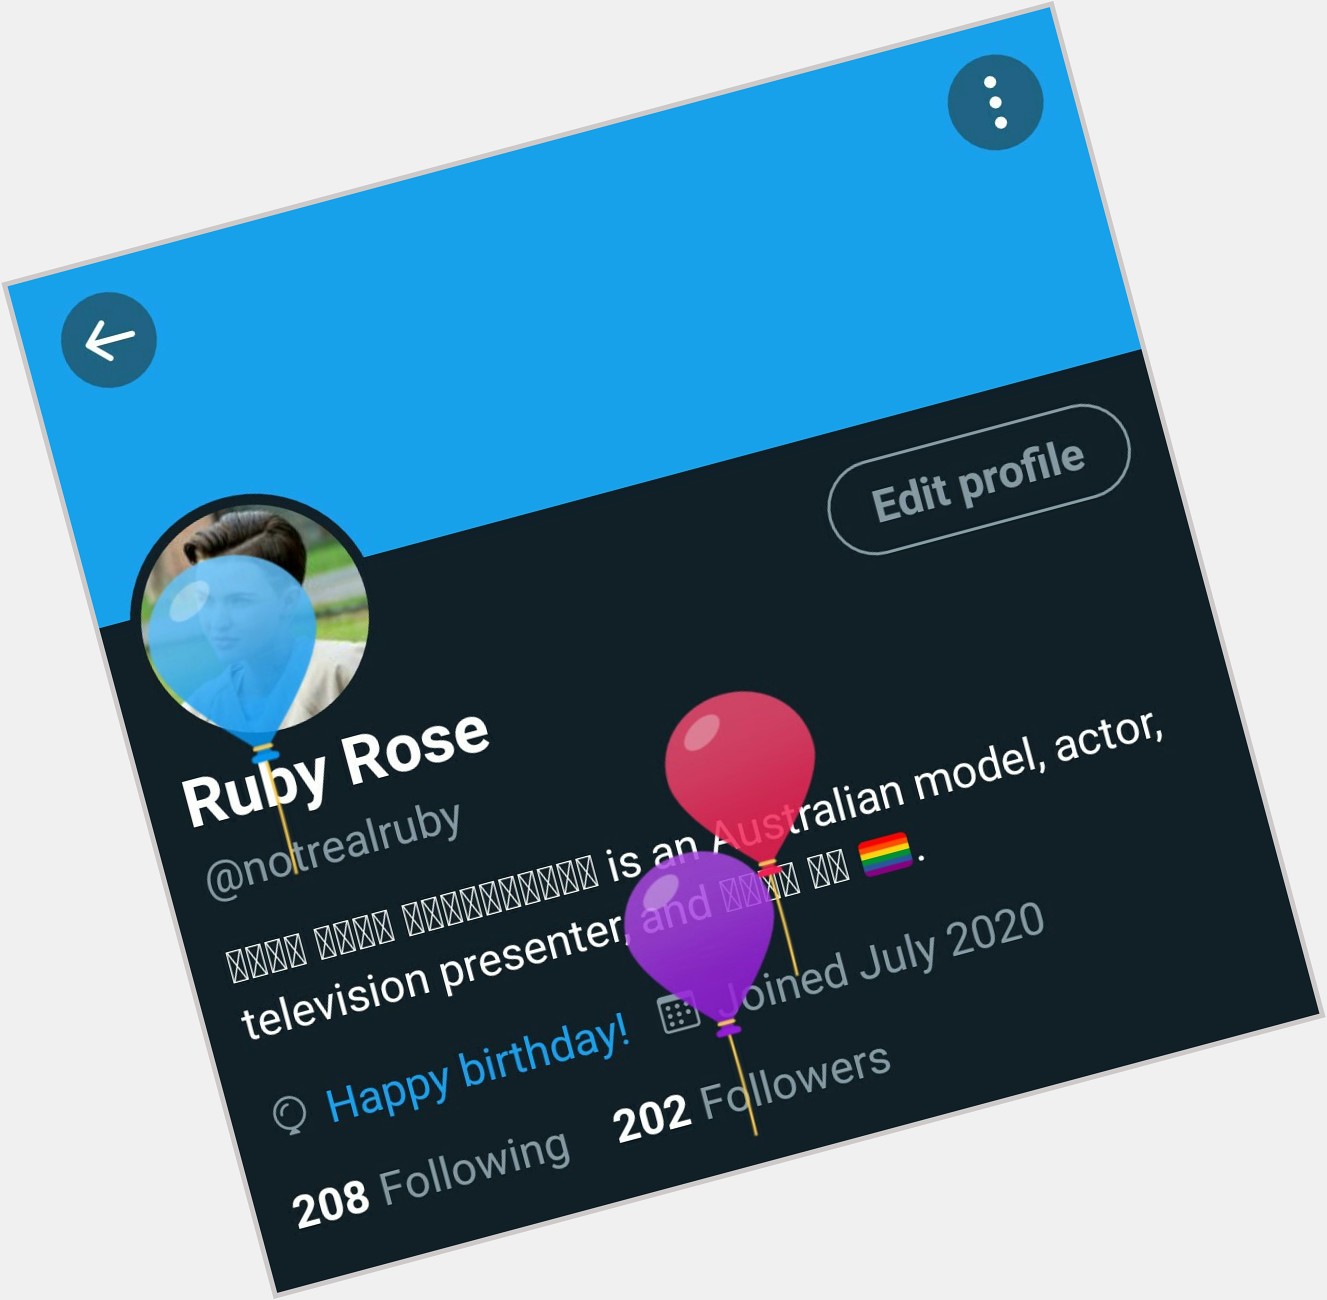 Happy birthday Ruby Rose and all of her roleplayers. 